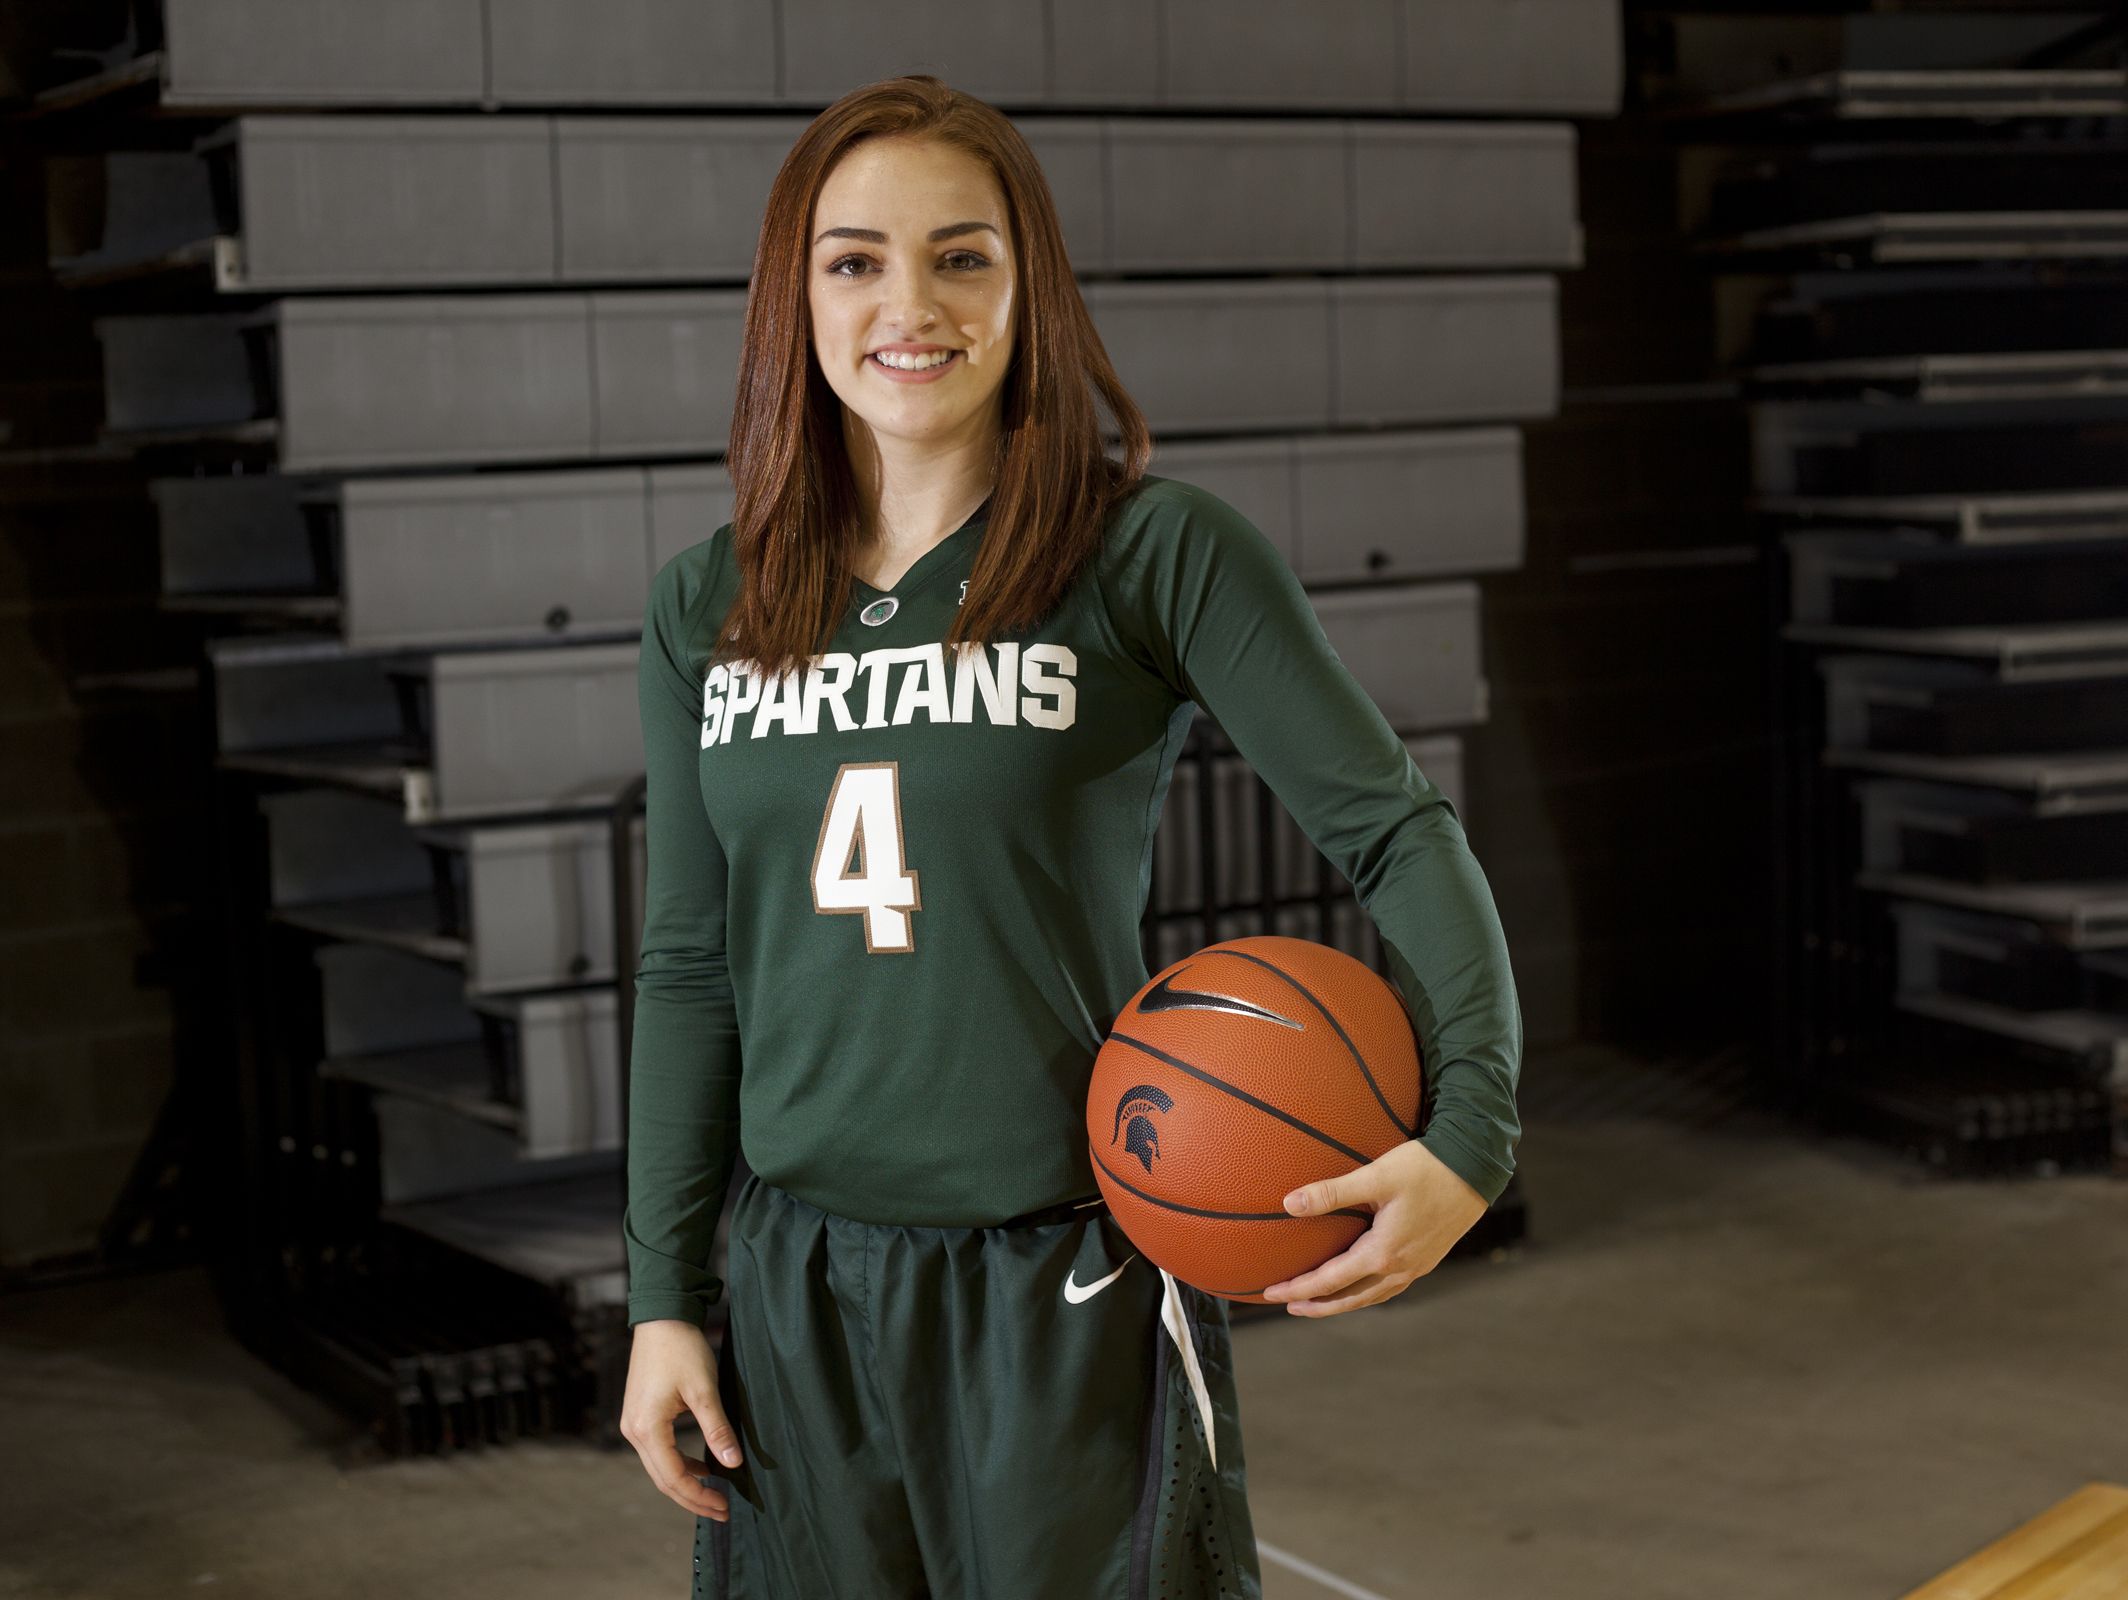 Freshman guard Taryn McCutcheon poses for a portrait on Wednesday, Oct. 19, 2016 during MSU's women's basketball media day at the Breslin Center.